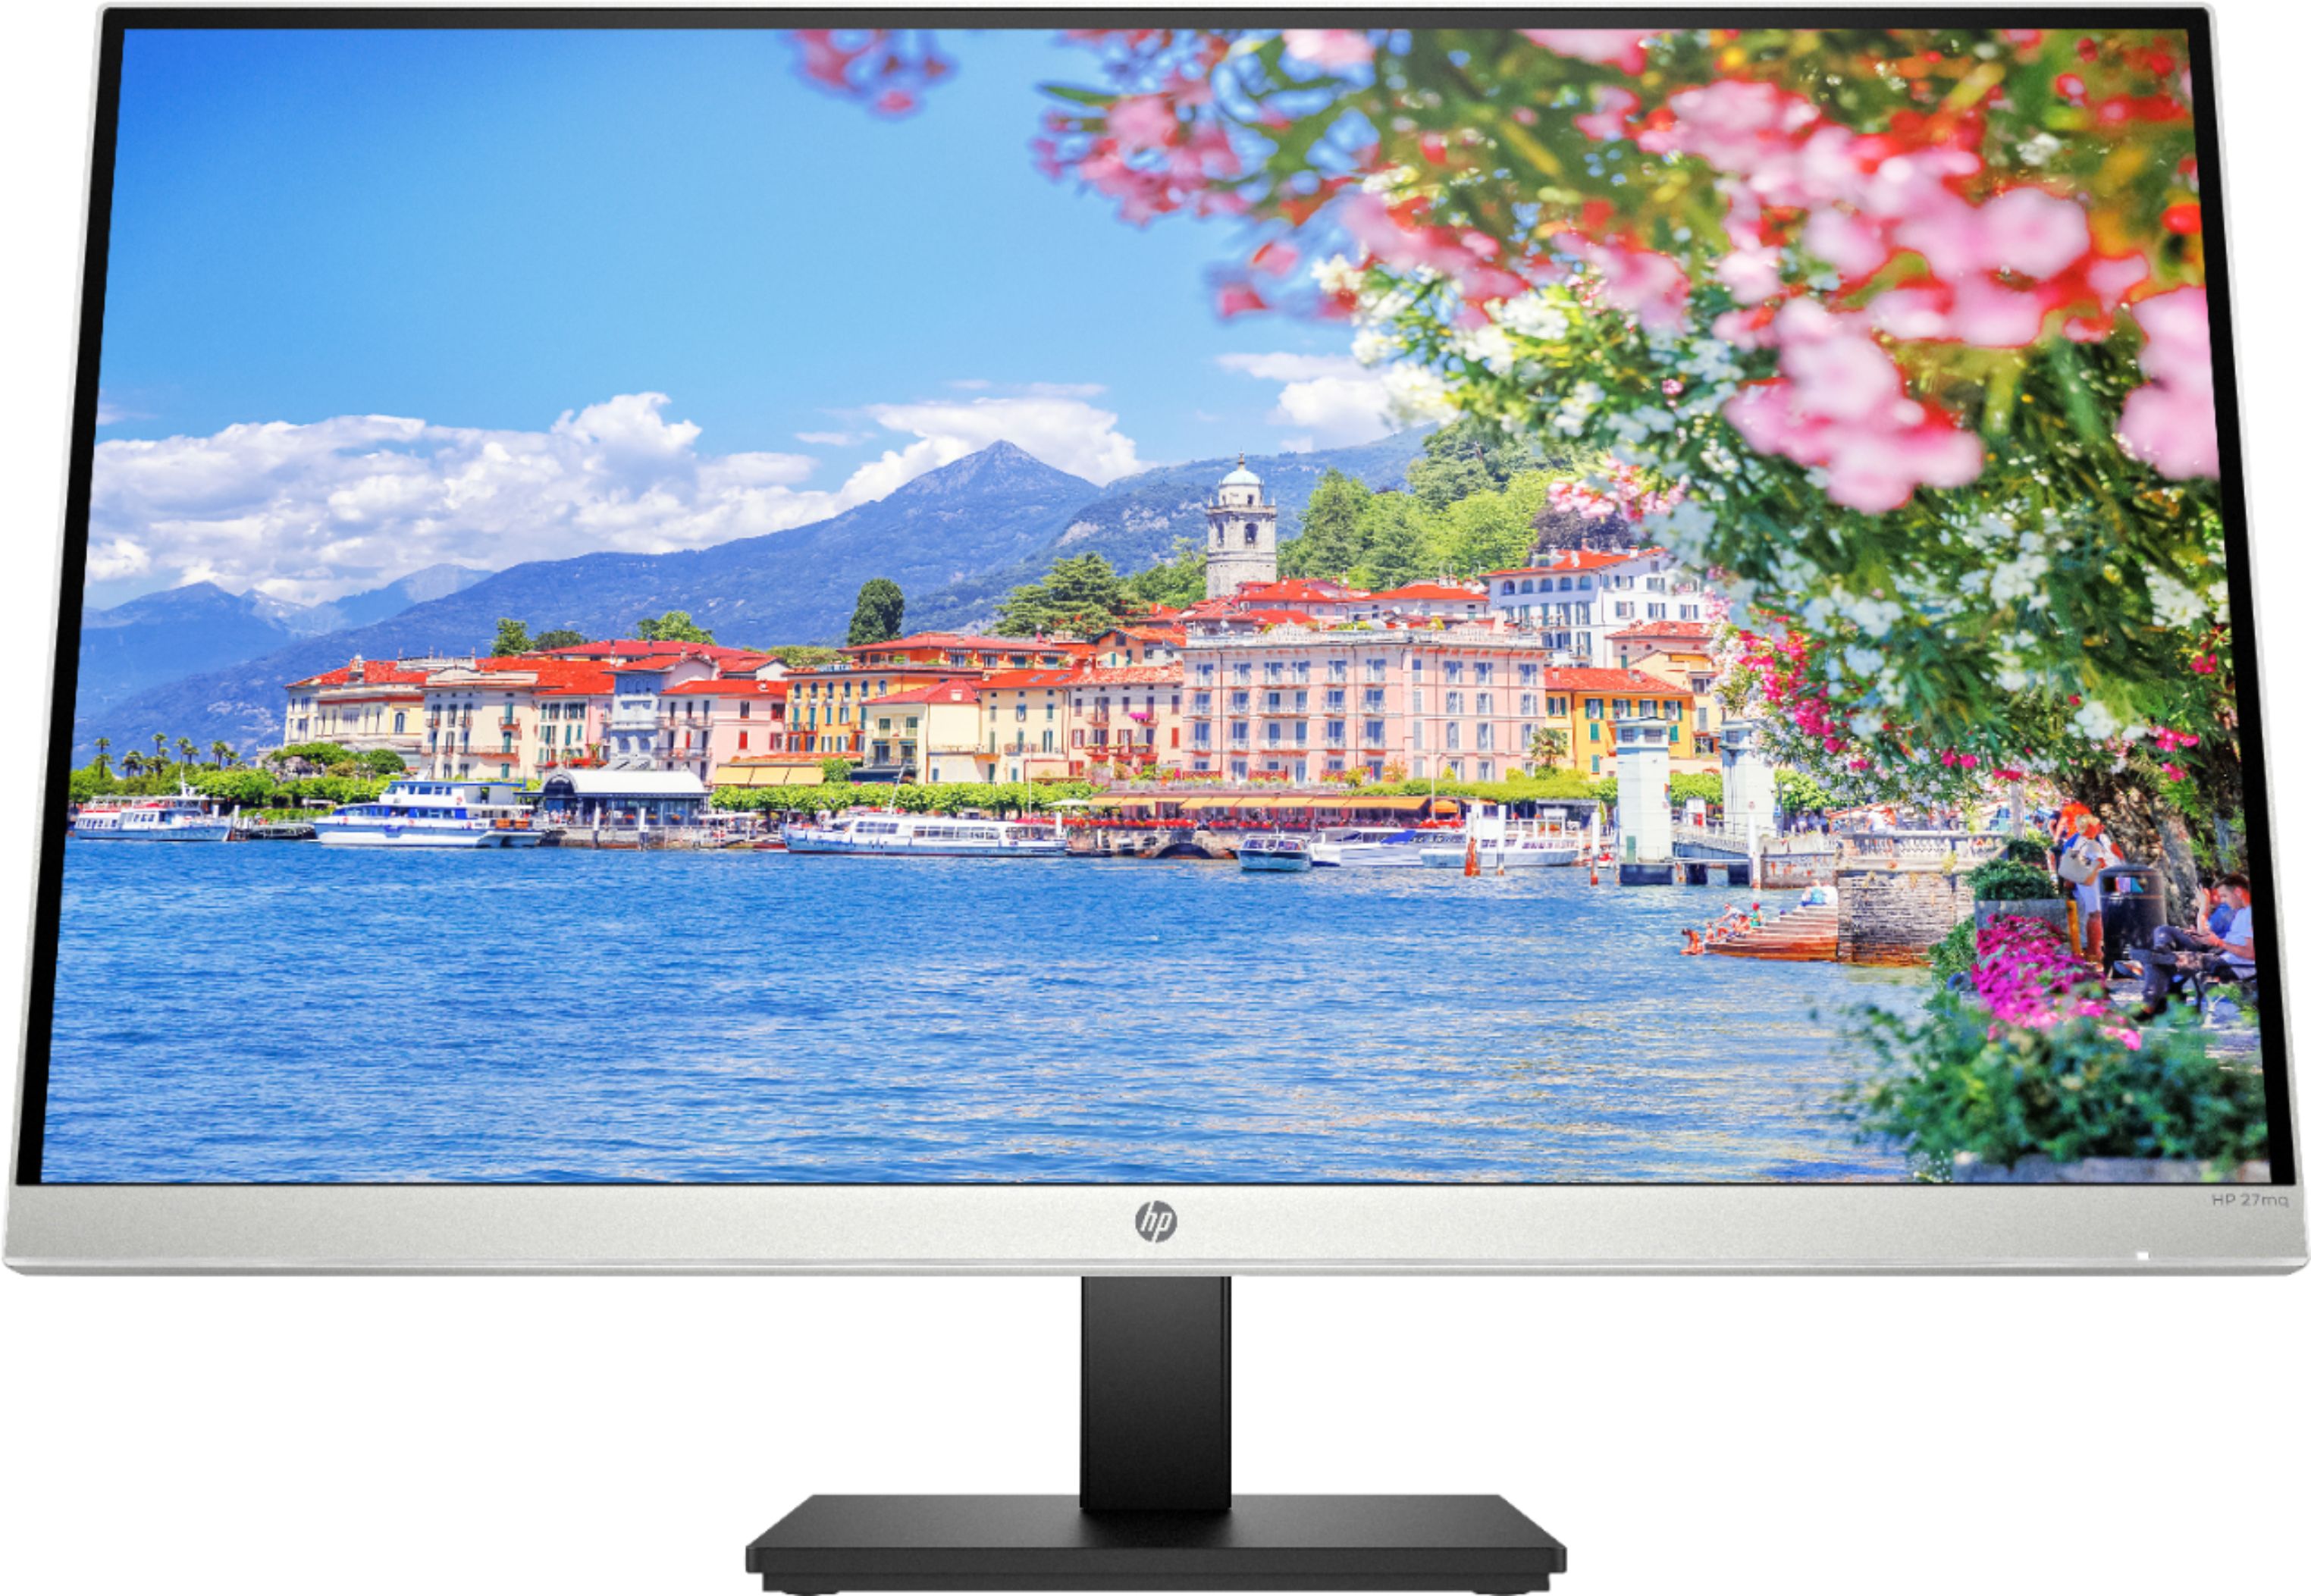 HP 27" IPS LED Monitor with Height VGA) Silver & Black 27mq - Best Buy